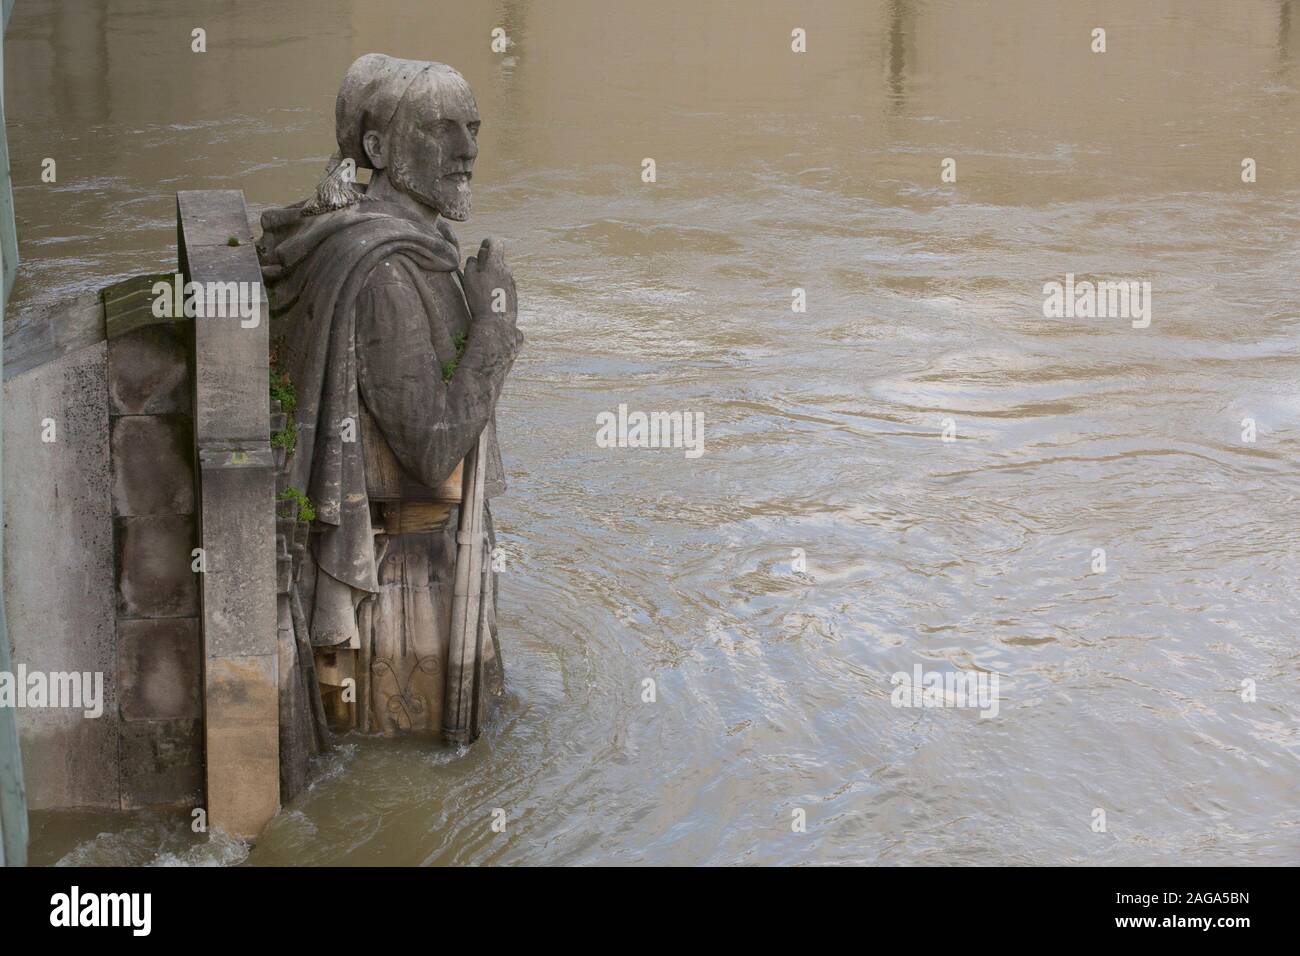 THE ZOUAVE STATUE HALF-SUBMERGED BY FLOODWATERS Stock Photo